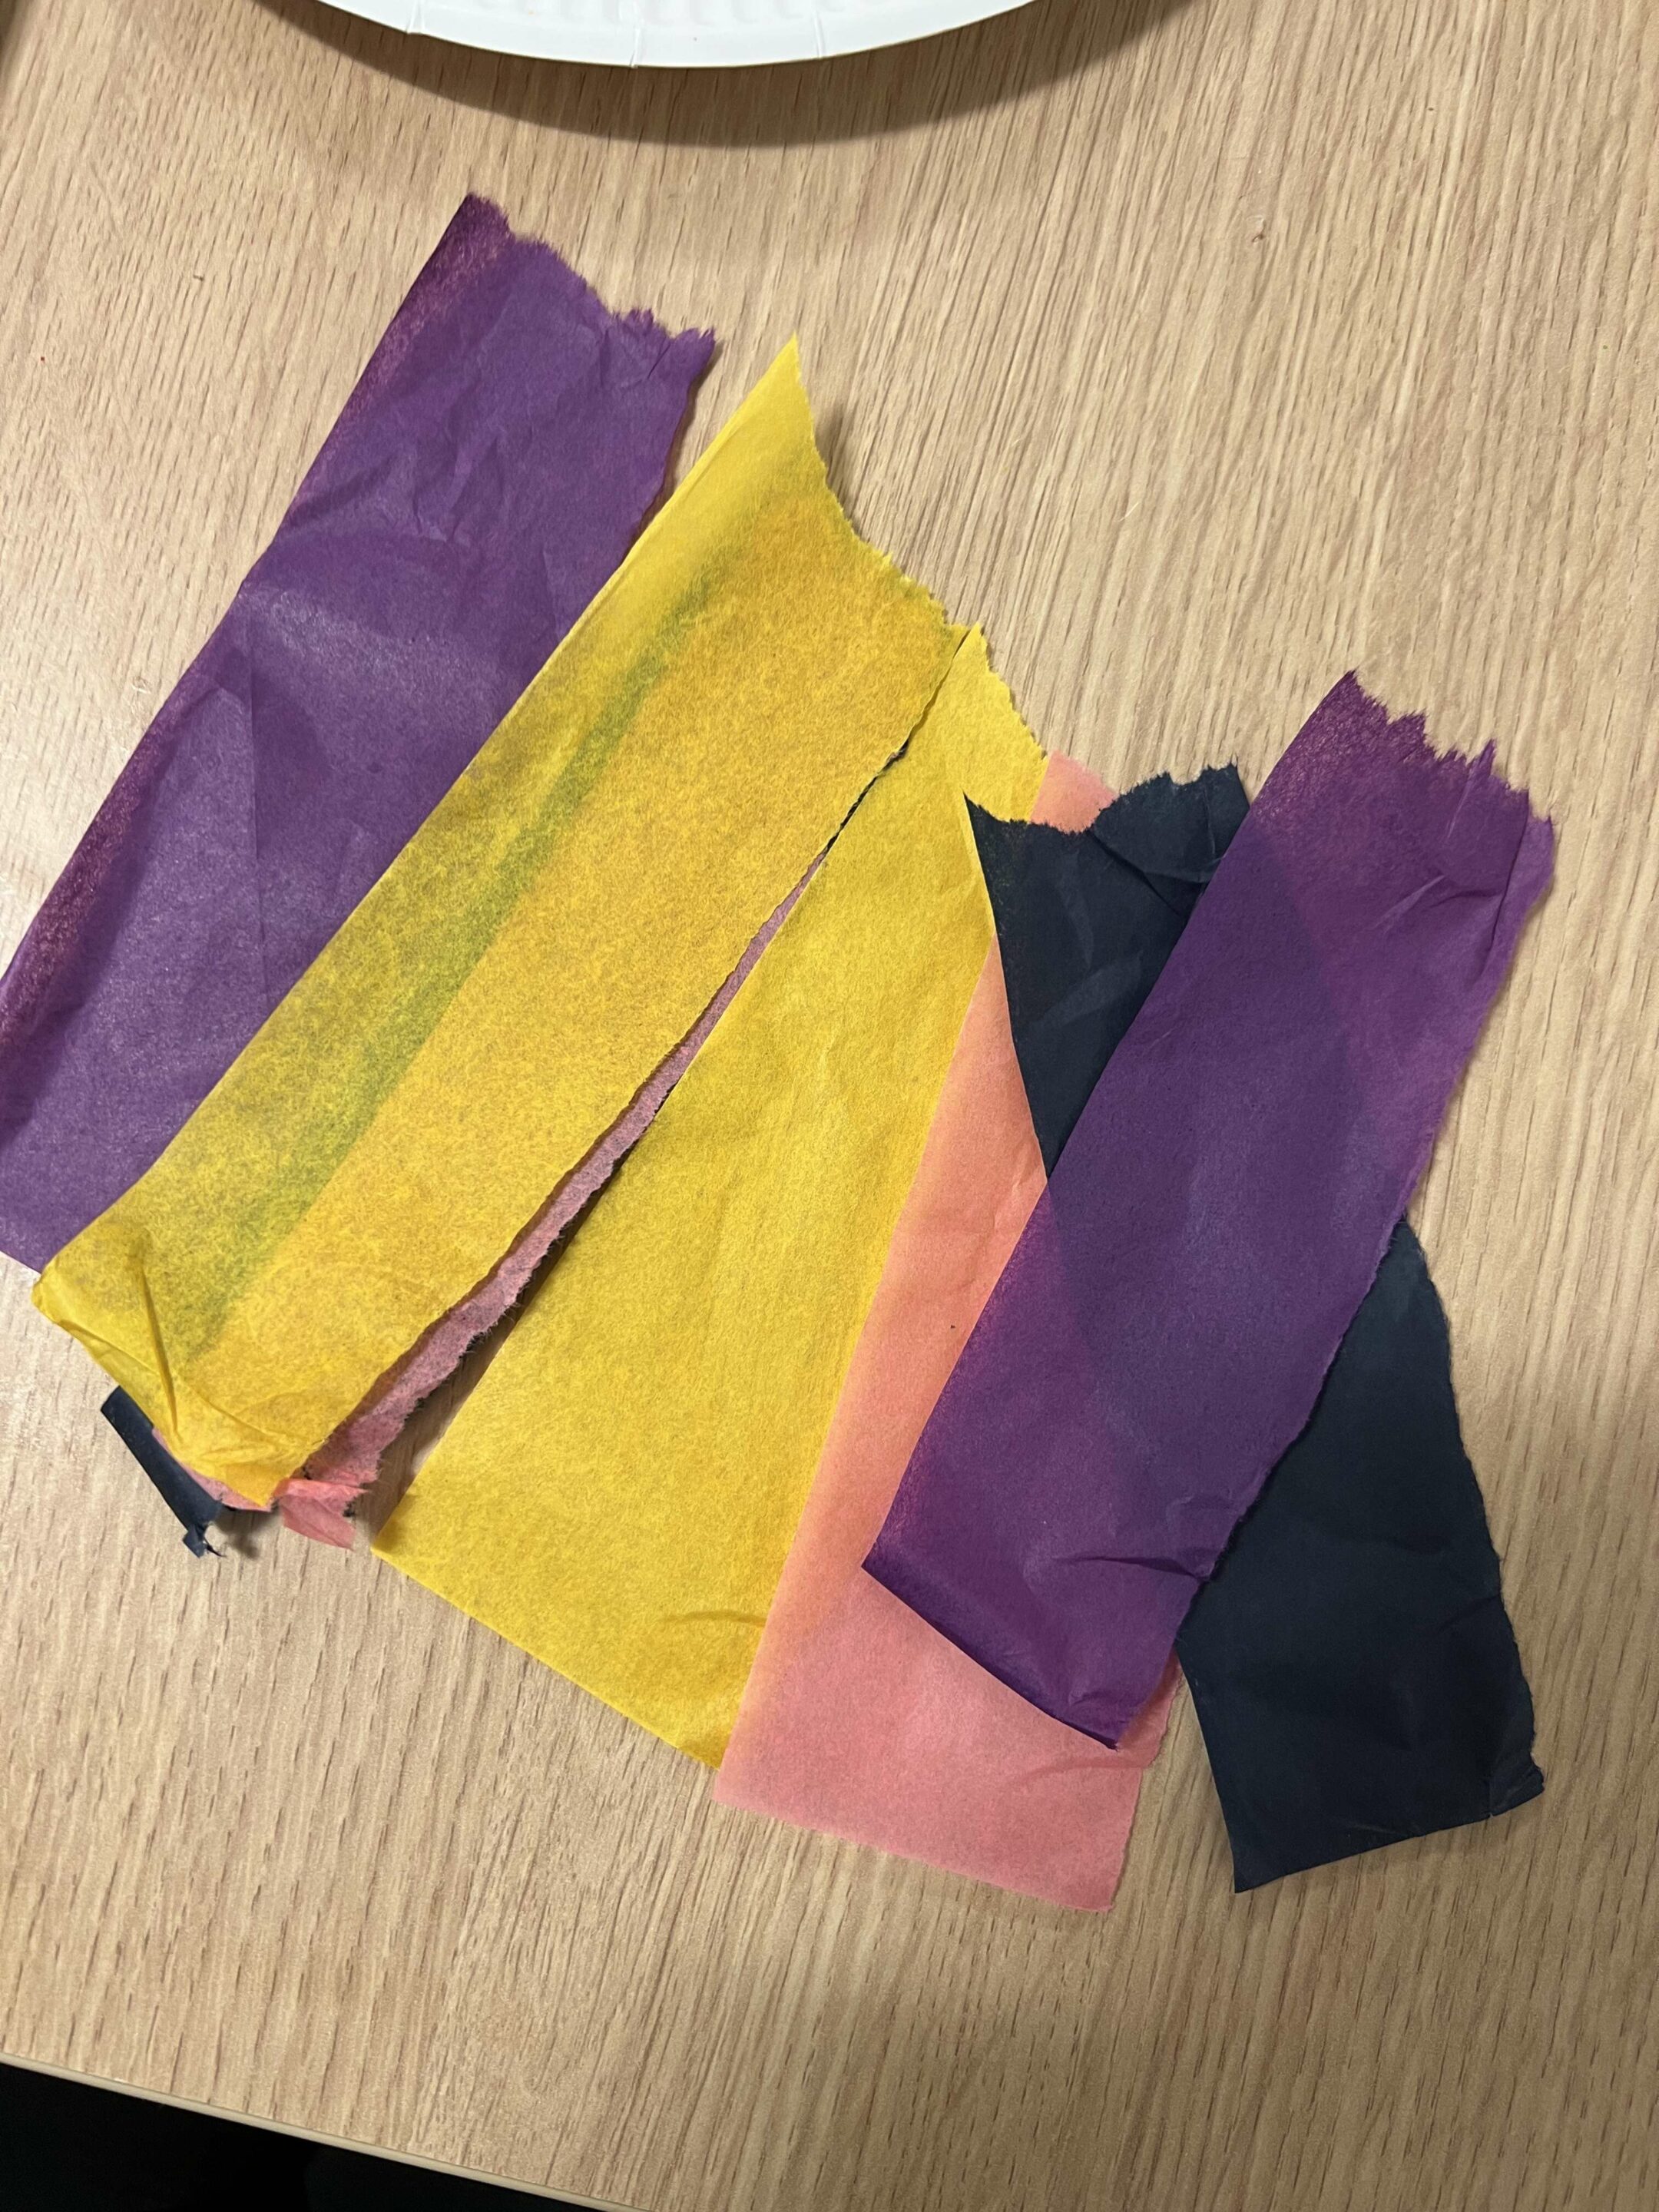 strips of coloured tissue paper